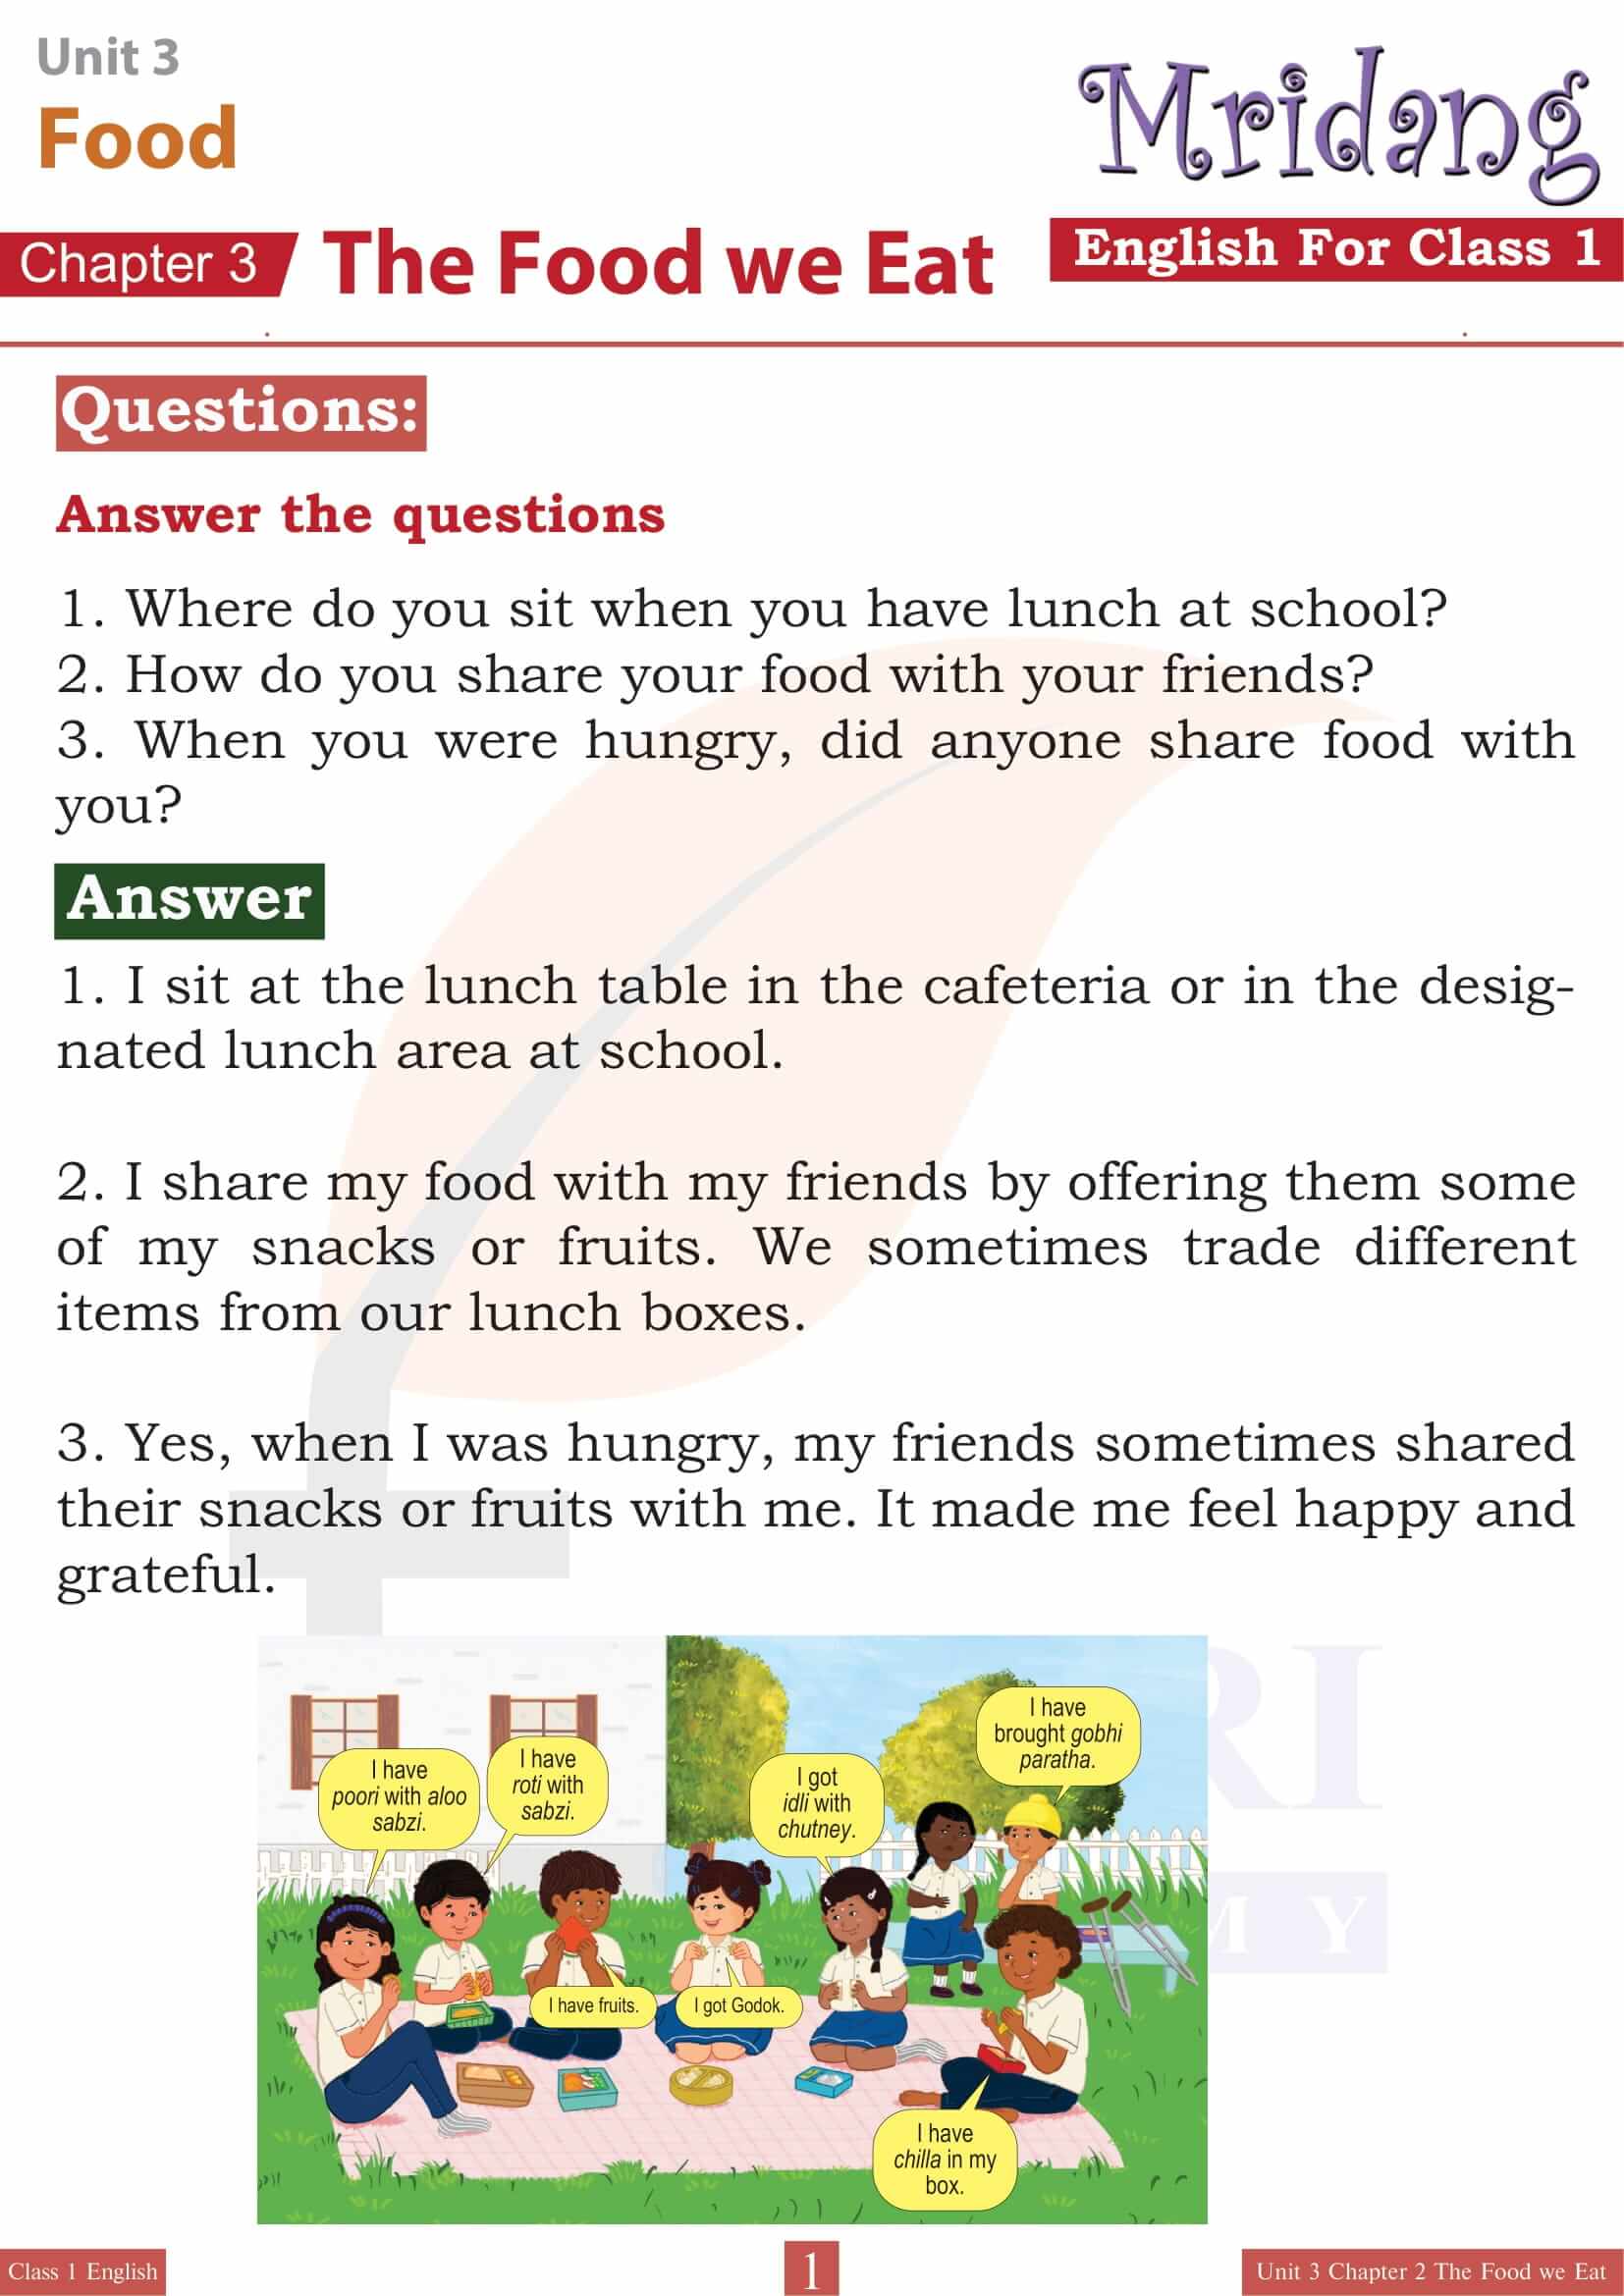 NCERT Solutions for Class 1 English Mridang Unit 3 Food Chapter 2 The Food we Eat